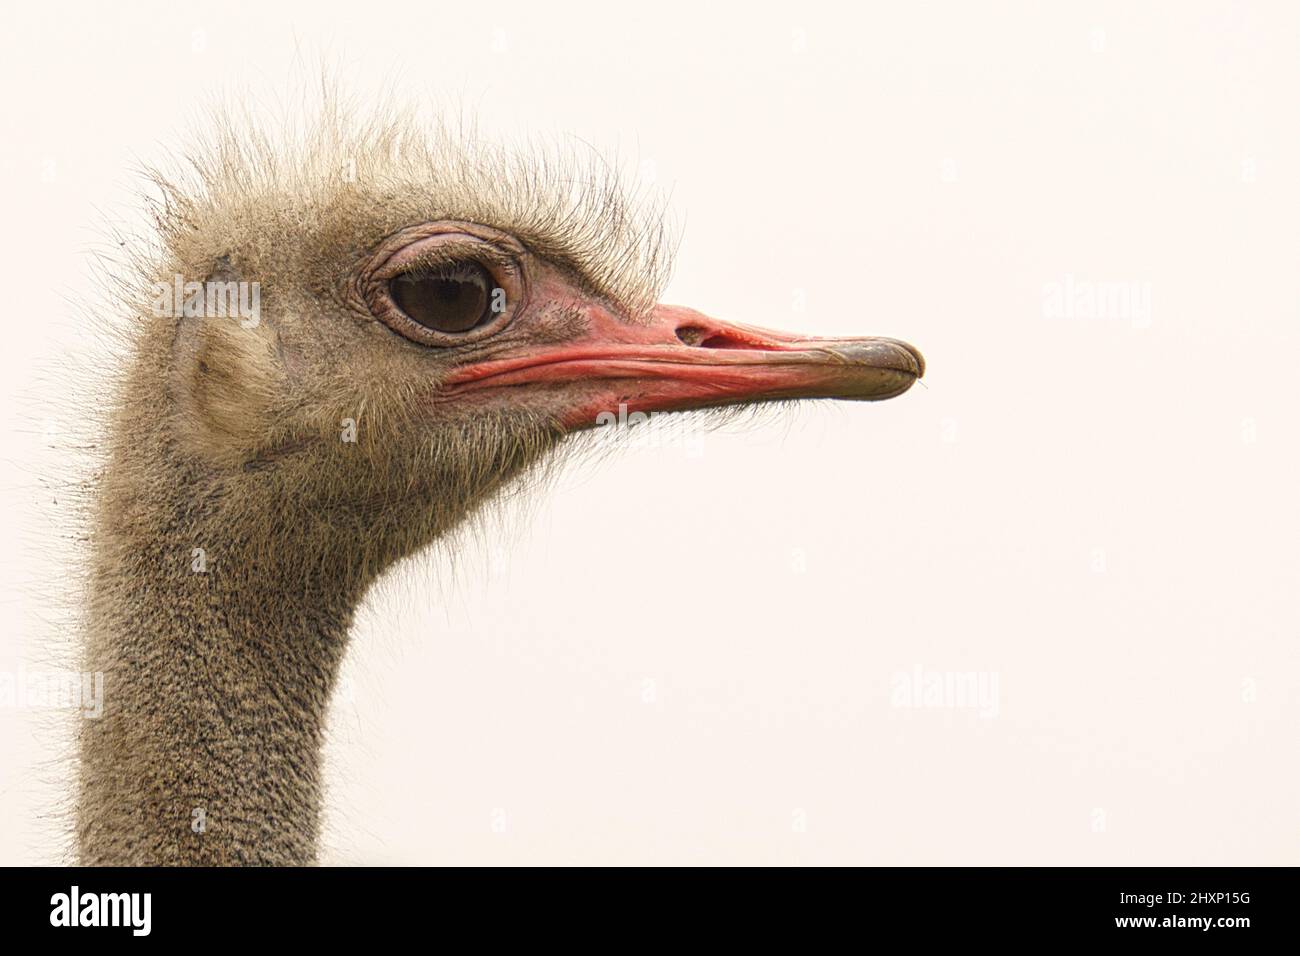 Ostrich in profile. The largest bird in the world. White neck, red beak.  Animal shot Stock Photo - Alamy